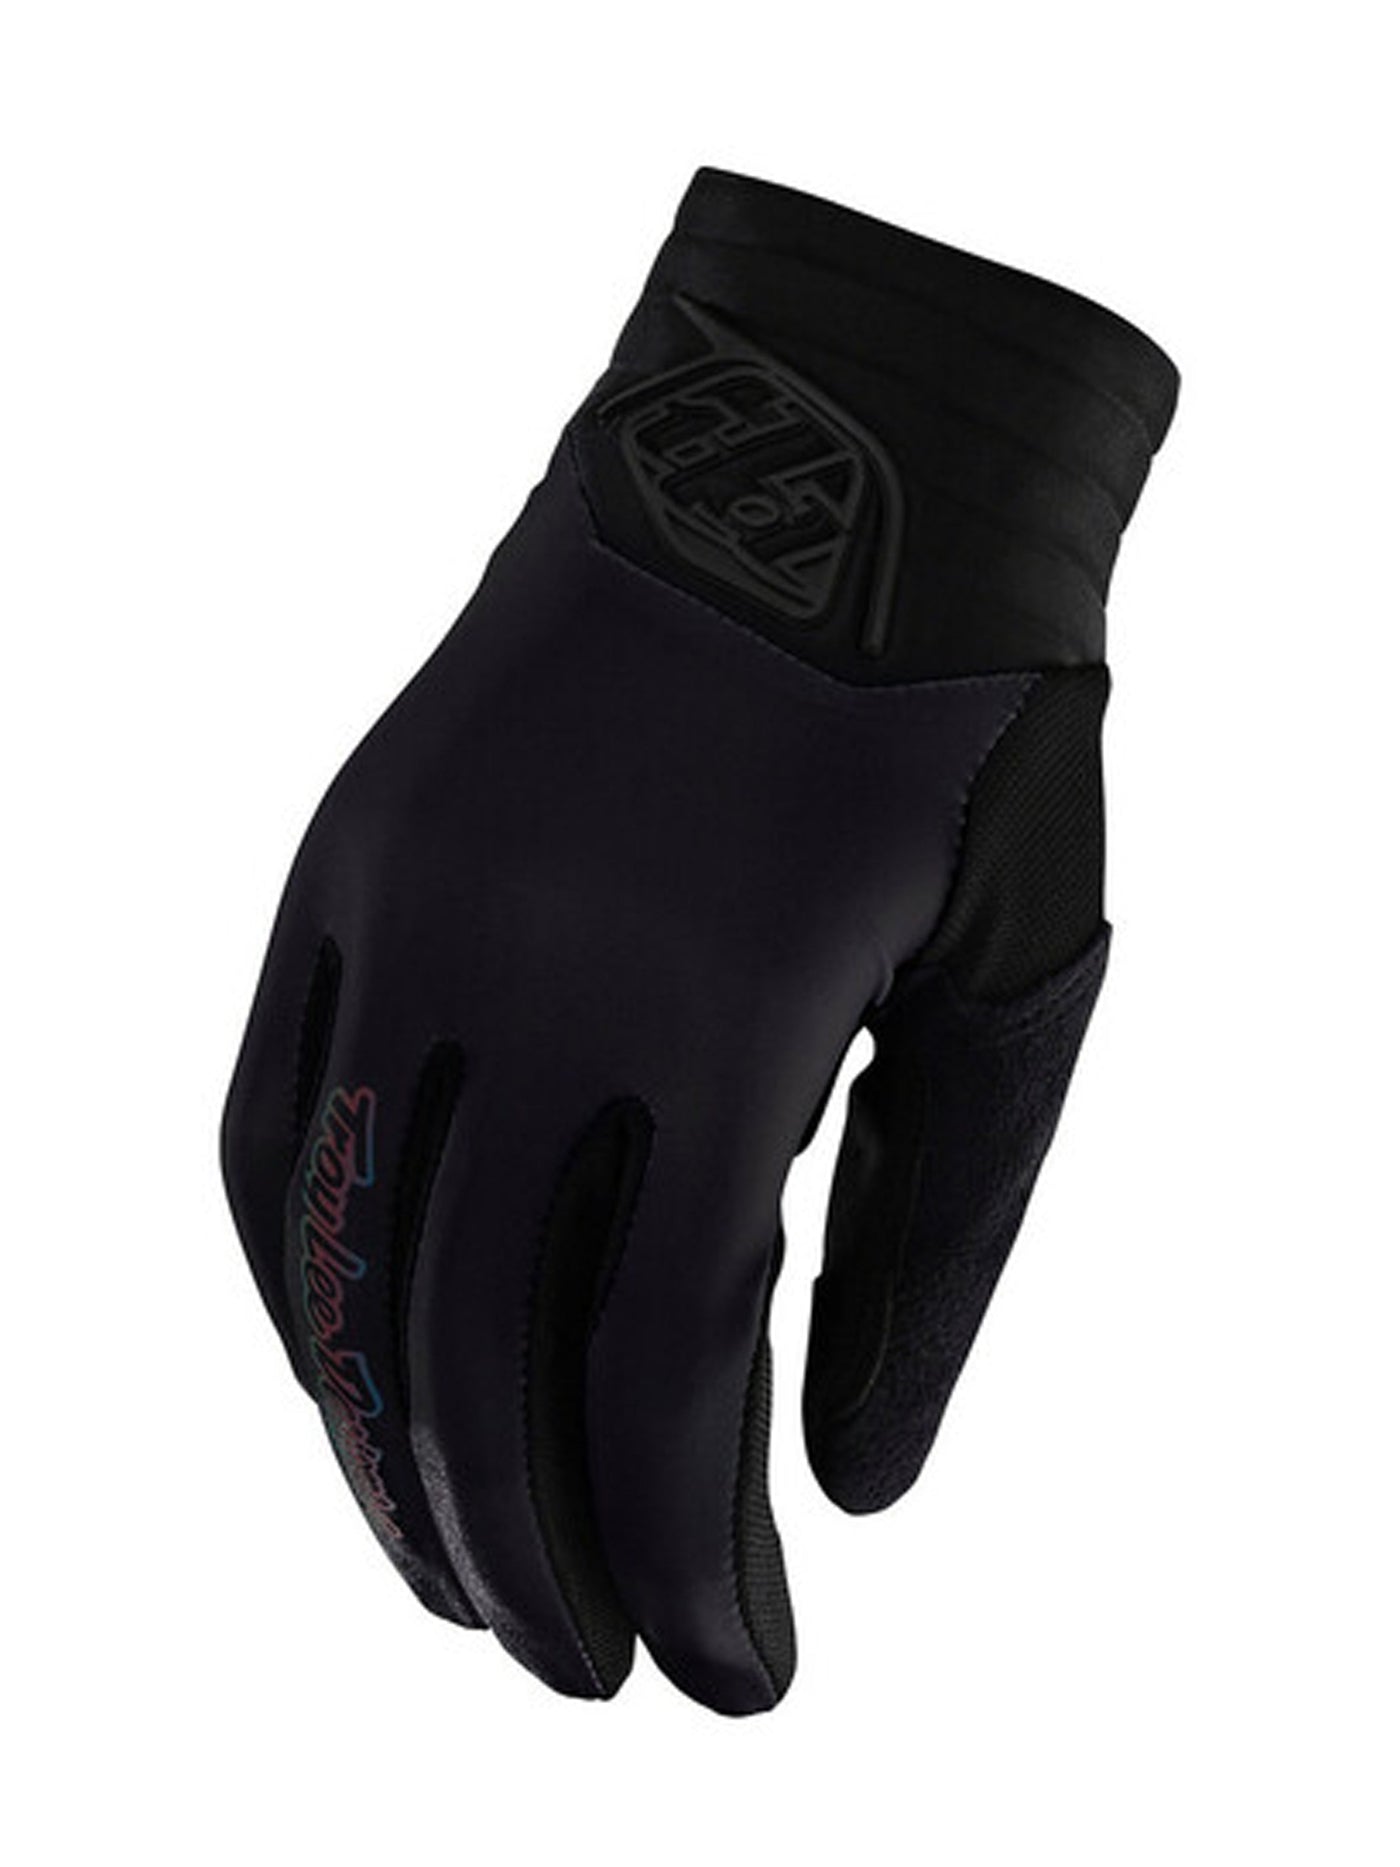 Troy Lee Designs guantes LUXE de mujer negro